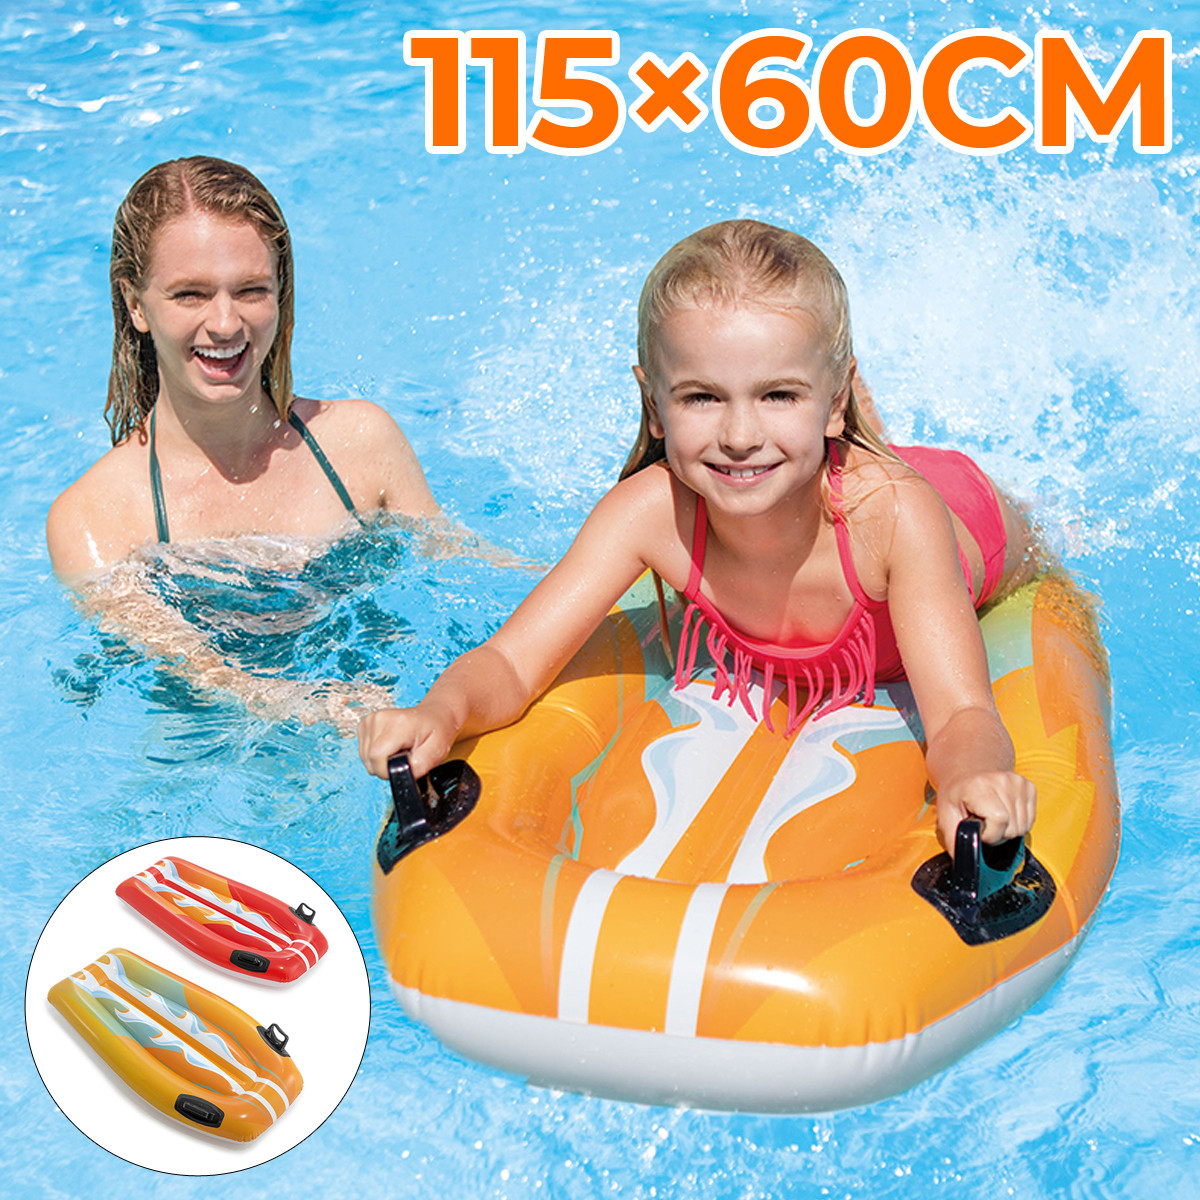 115x60cm-Kids-Inflatable-Paddle-Board-Swimming-Surfboard-Swimming-Pool-Float-Children-Funny-Toys-for-1727066-1